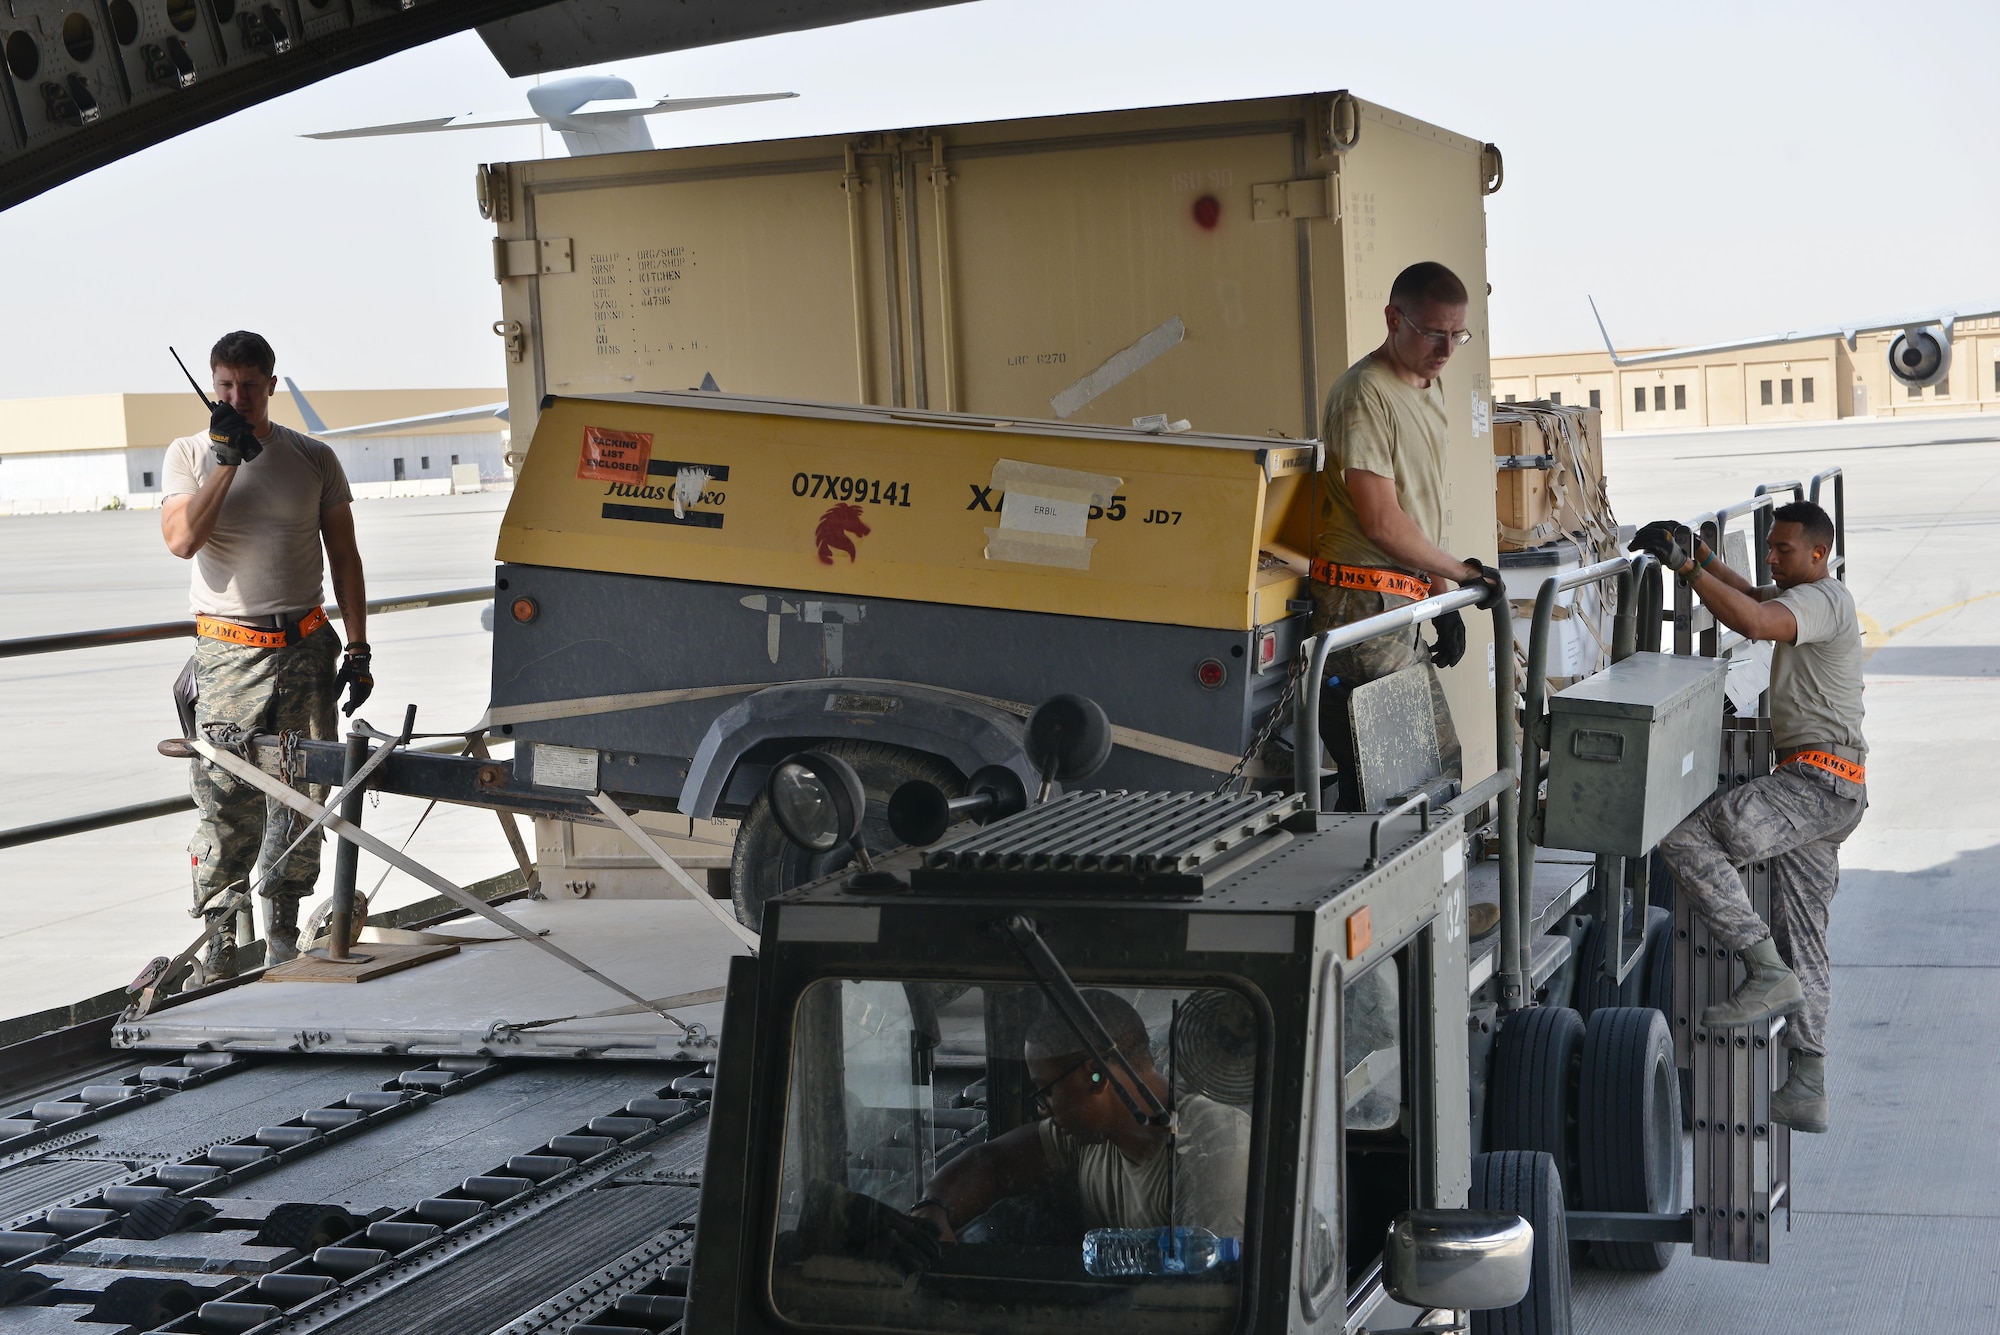 Airmen from the 8th Expeditionary Air Mobility Squadron load generators onto a C-17 Globemaster aircraft prior to take off May 13, 2015 at Al Udeid Air Base, Qatar. Airmen from separate squadrons deployed to Al Udeid helped support a mission for forward deployed members of RED HORSE Civil Engineering to repair a runway in Southwest Asia in support of Operation Inherent Resolve. (U.S. Air Force photo/Staff Sgt. Alexandre Montes)